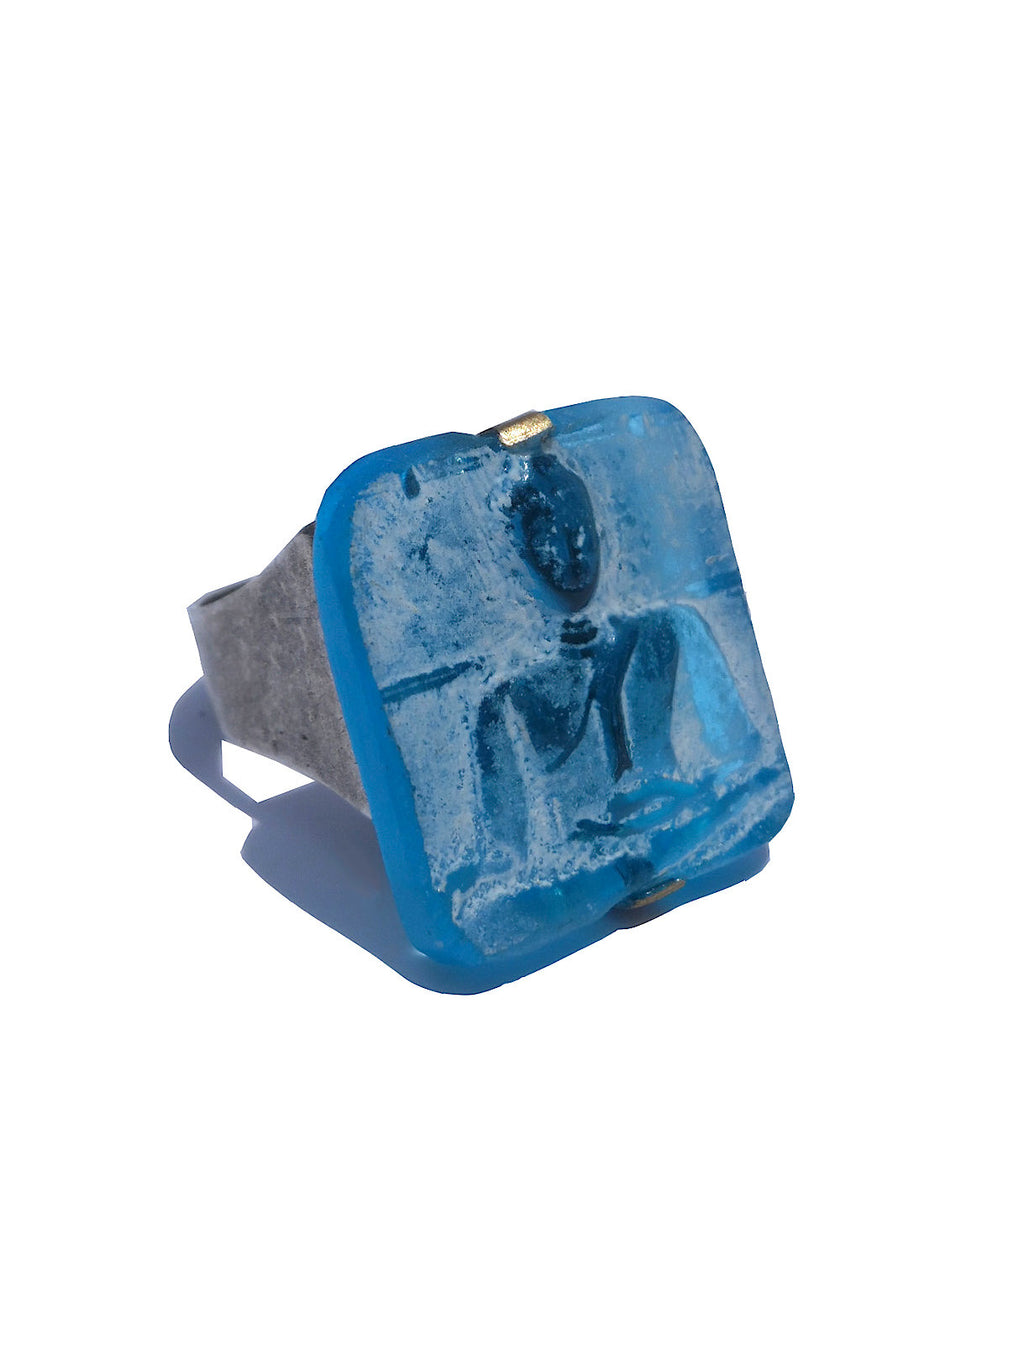 Ring Hand Cast French Glass Blue Buddha